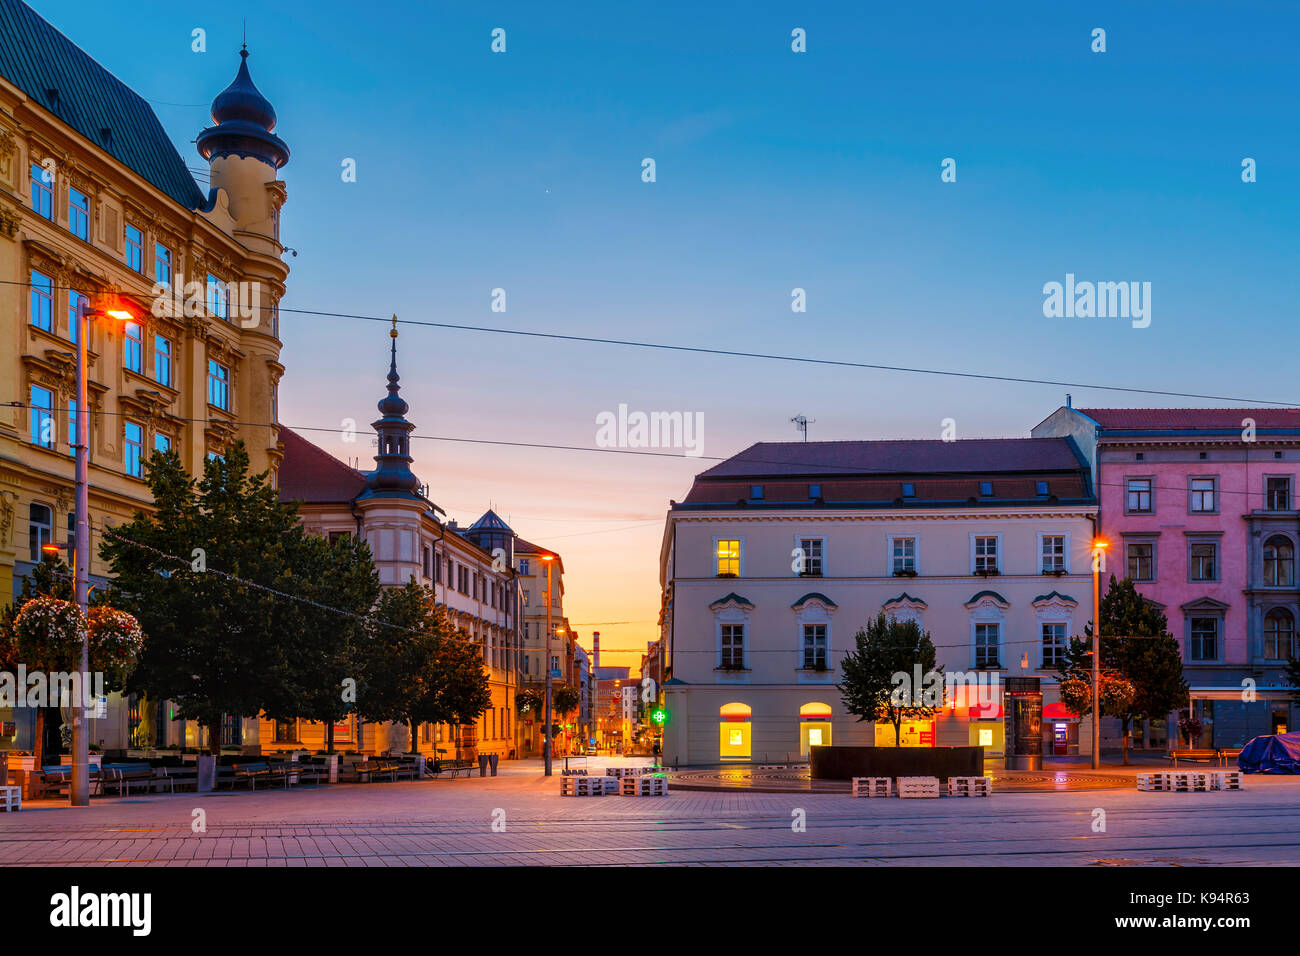 Square in the old town of Brno, Czech Republic. Stock Photo